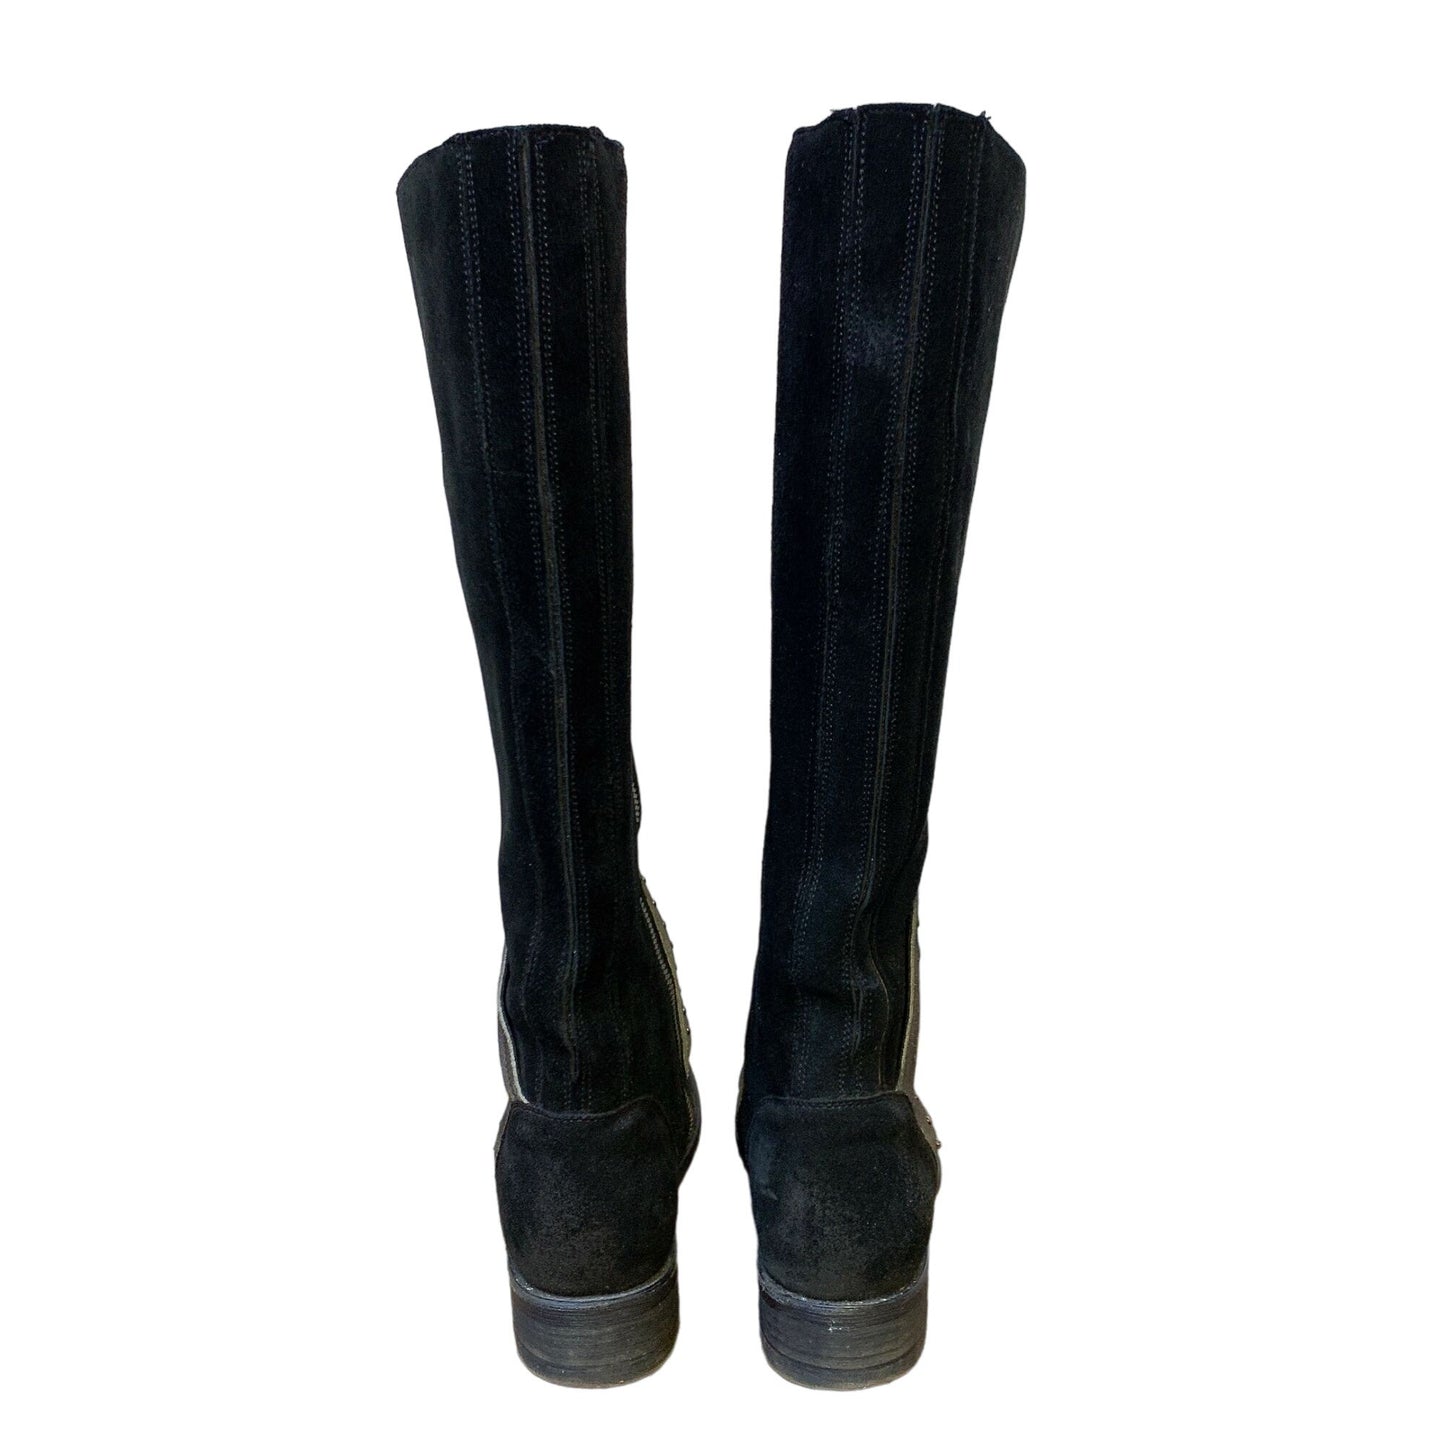 *Corral Black Suede Knee High Boots Size 7